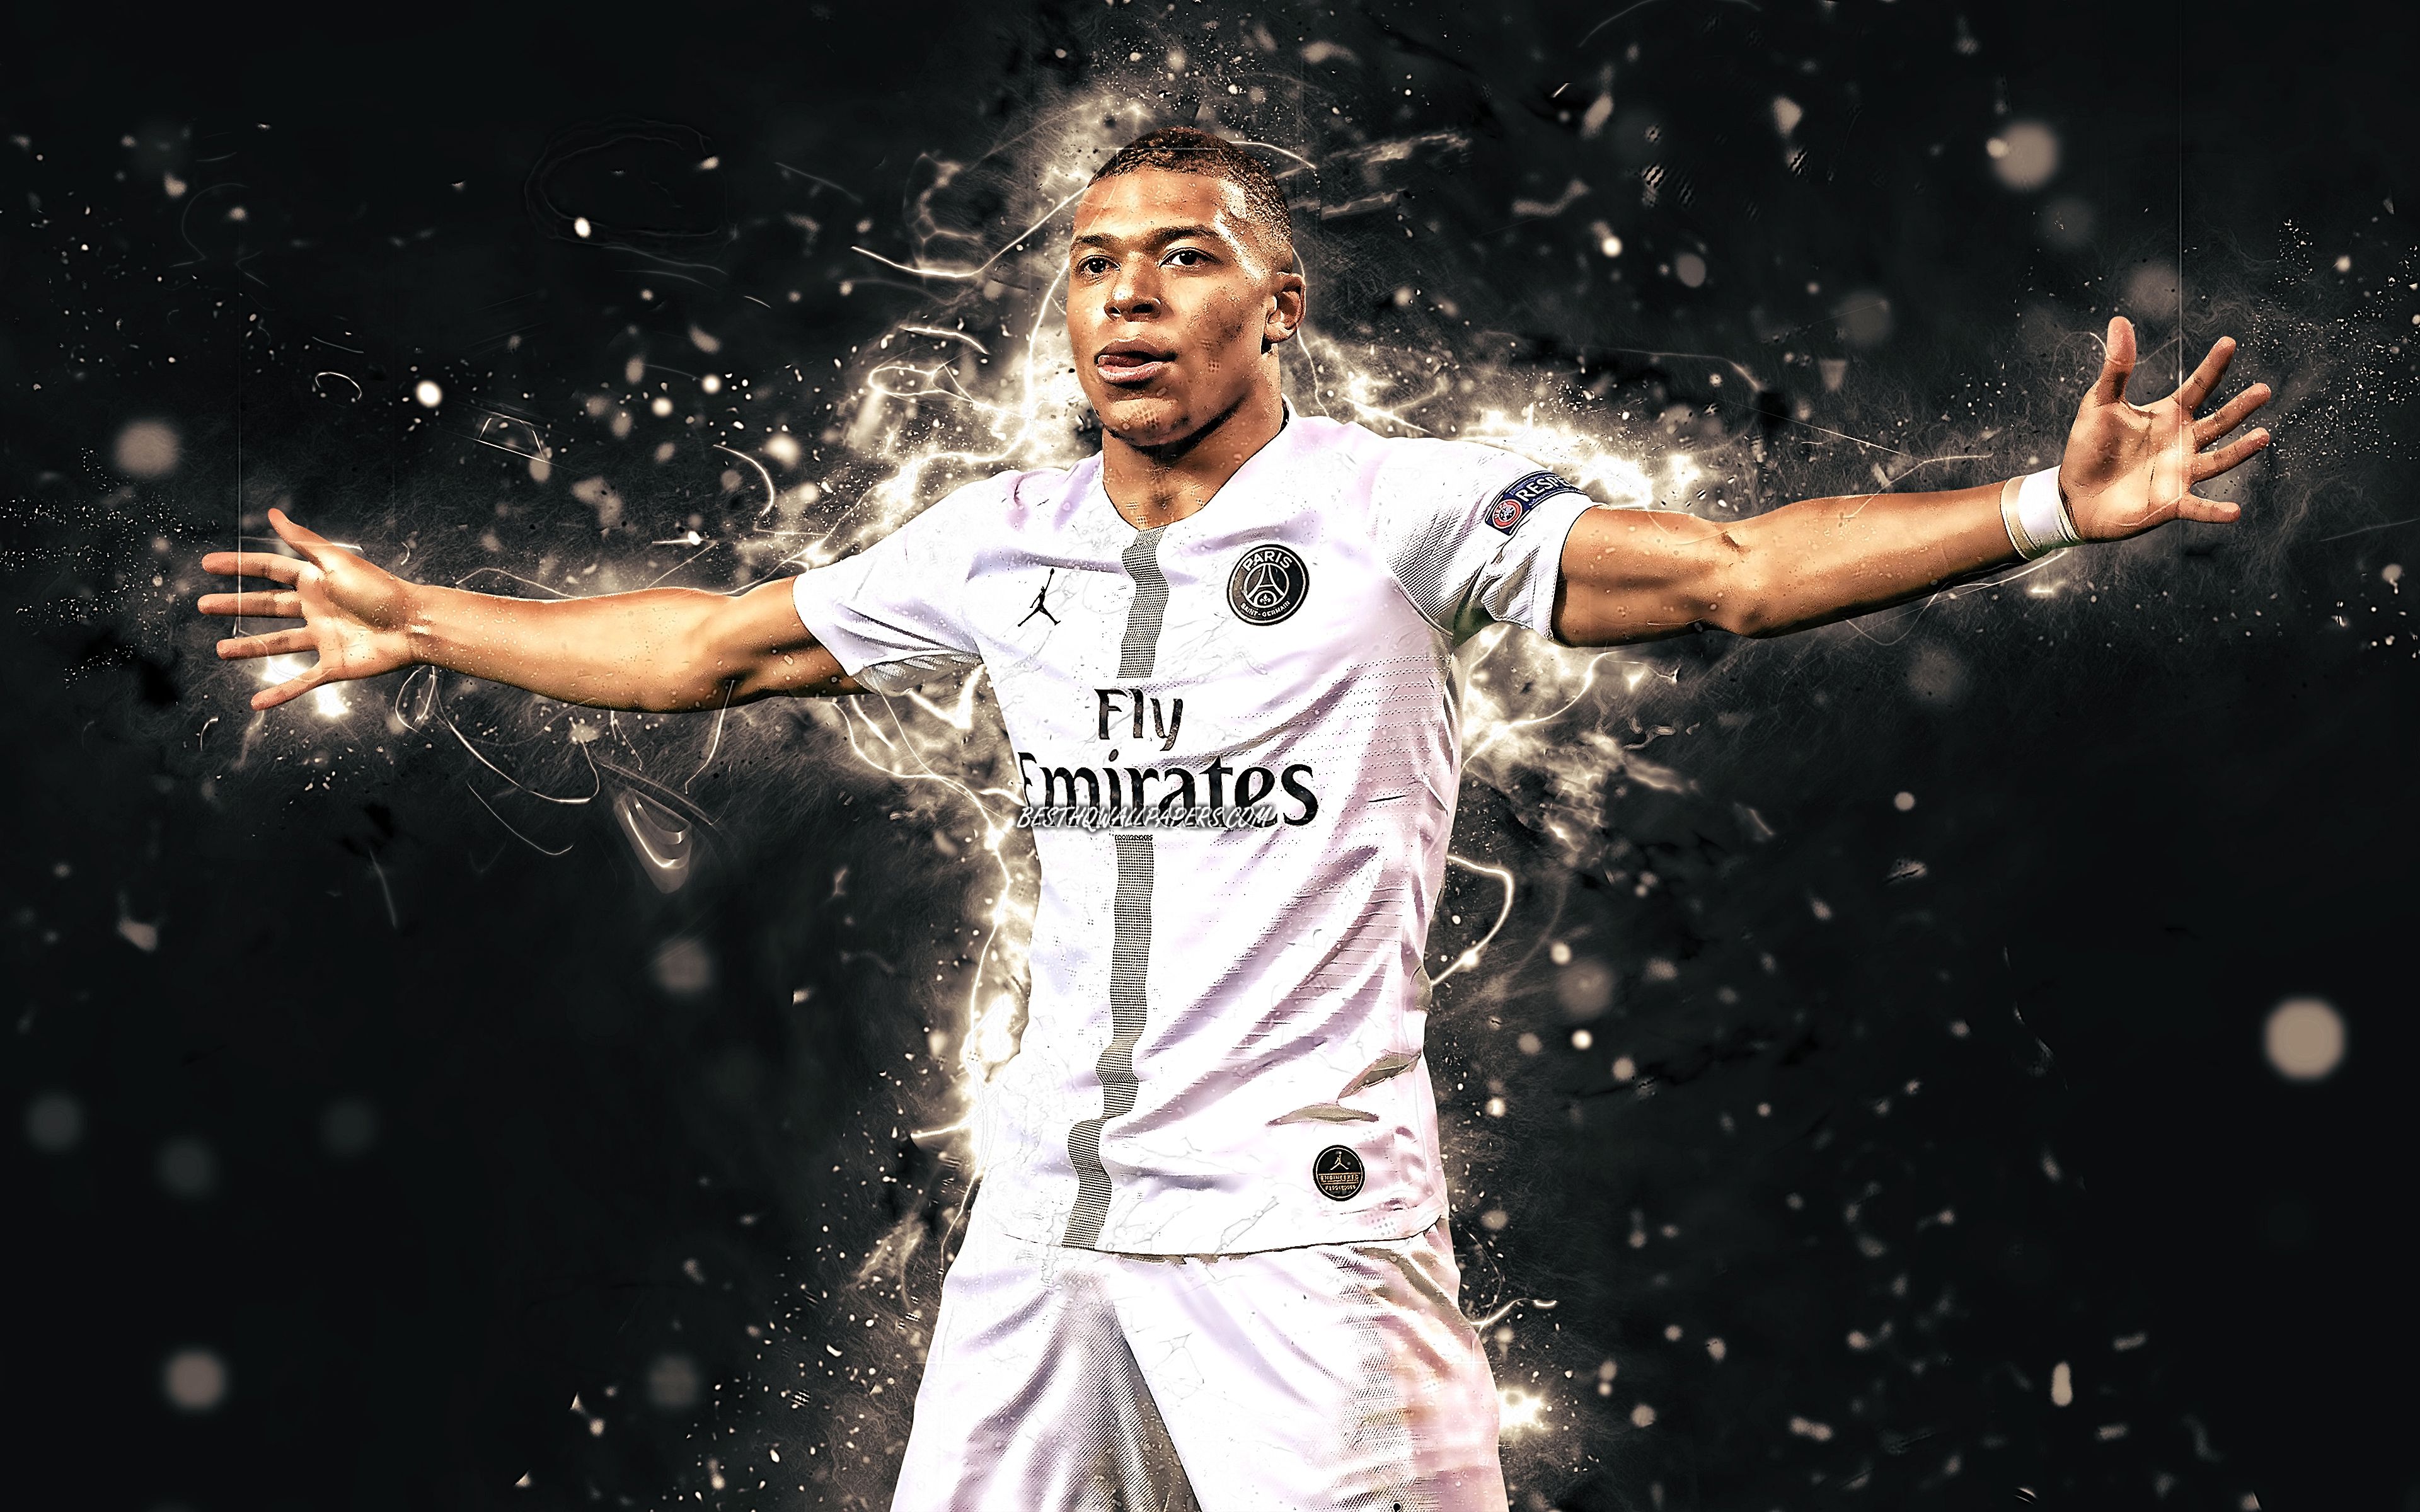 Download Wallpaper 4k, Kylian Mbappe, White Unifor, PSG, French Footballers, Match, Ligue Paris Saint Germain, Mbappe, France, Football Stars, Neon Lights, Soccer For Desktop With Resolution 3840x2400. High Quality HD Picture Wallpaper